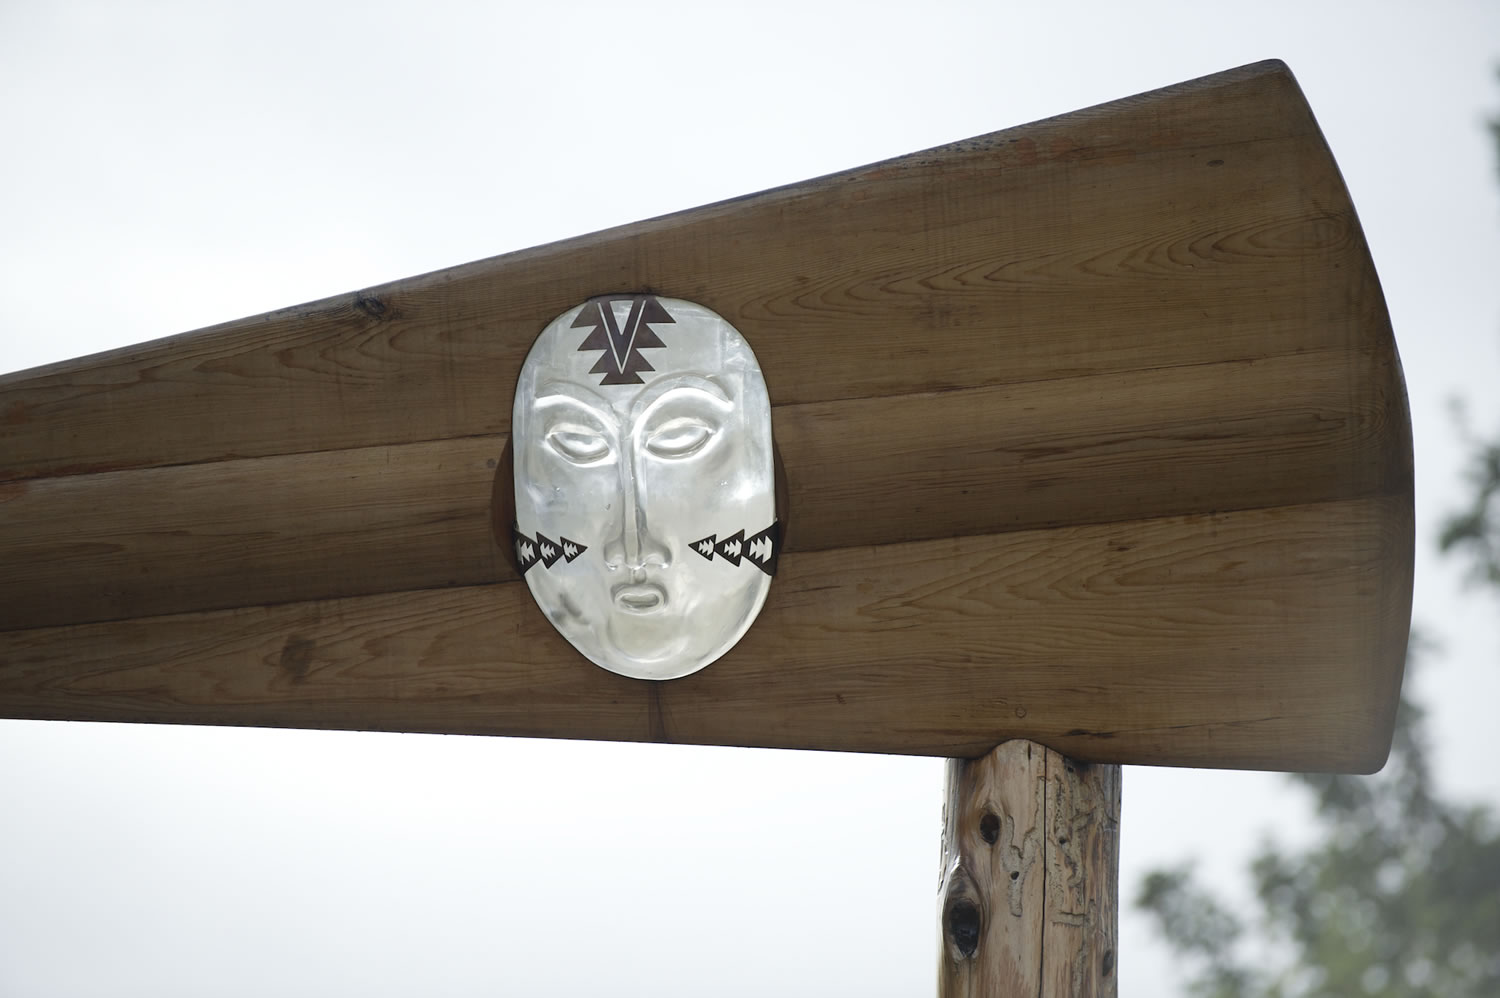 Lillian Pitt's artwork on the Vancouver Land Bridge includes the welcome gate topped with canoe paddles and a silver mask of a Chinook woman. &quot;I made the mask to honor Chinookan women,&quot; Pitt told the crowd.